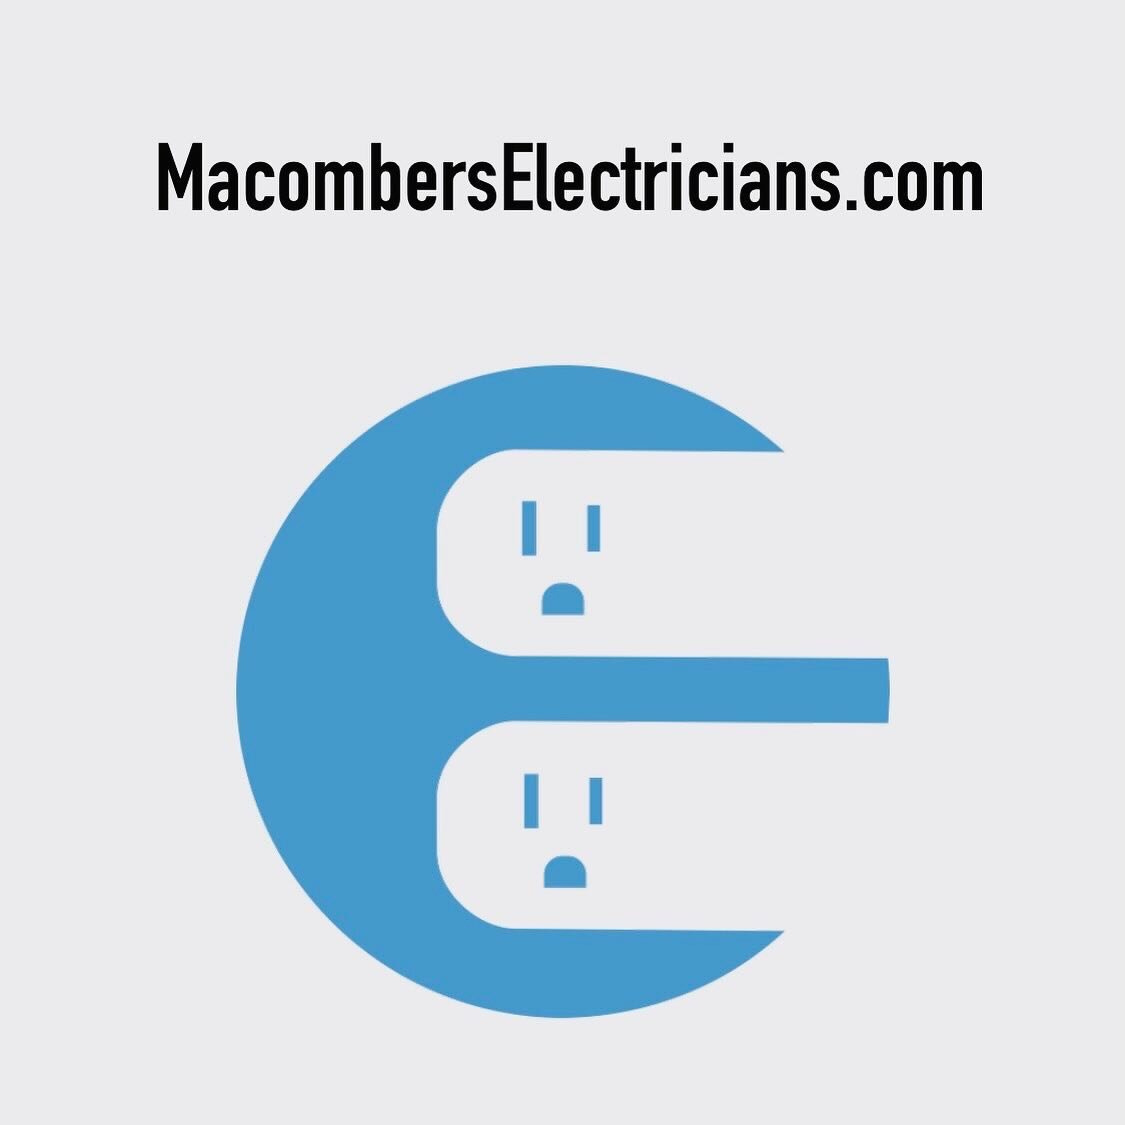 The new website is live!  www.macomberselectricians.com